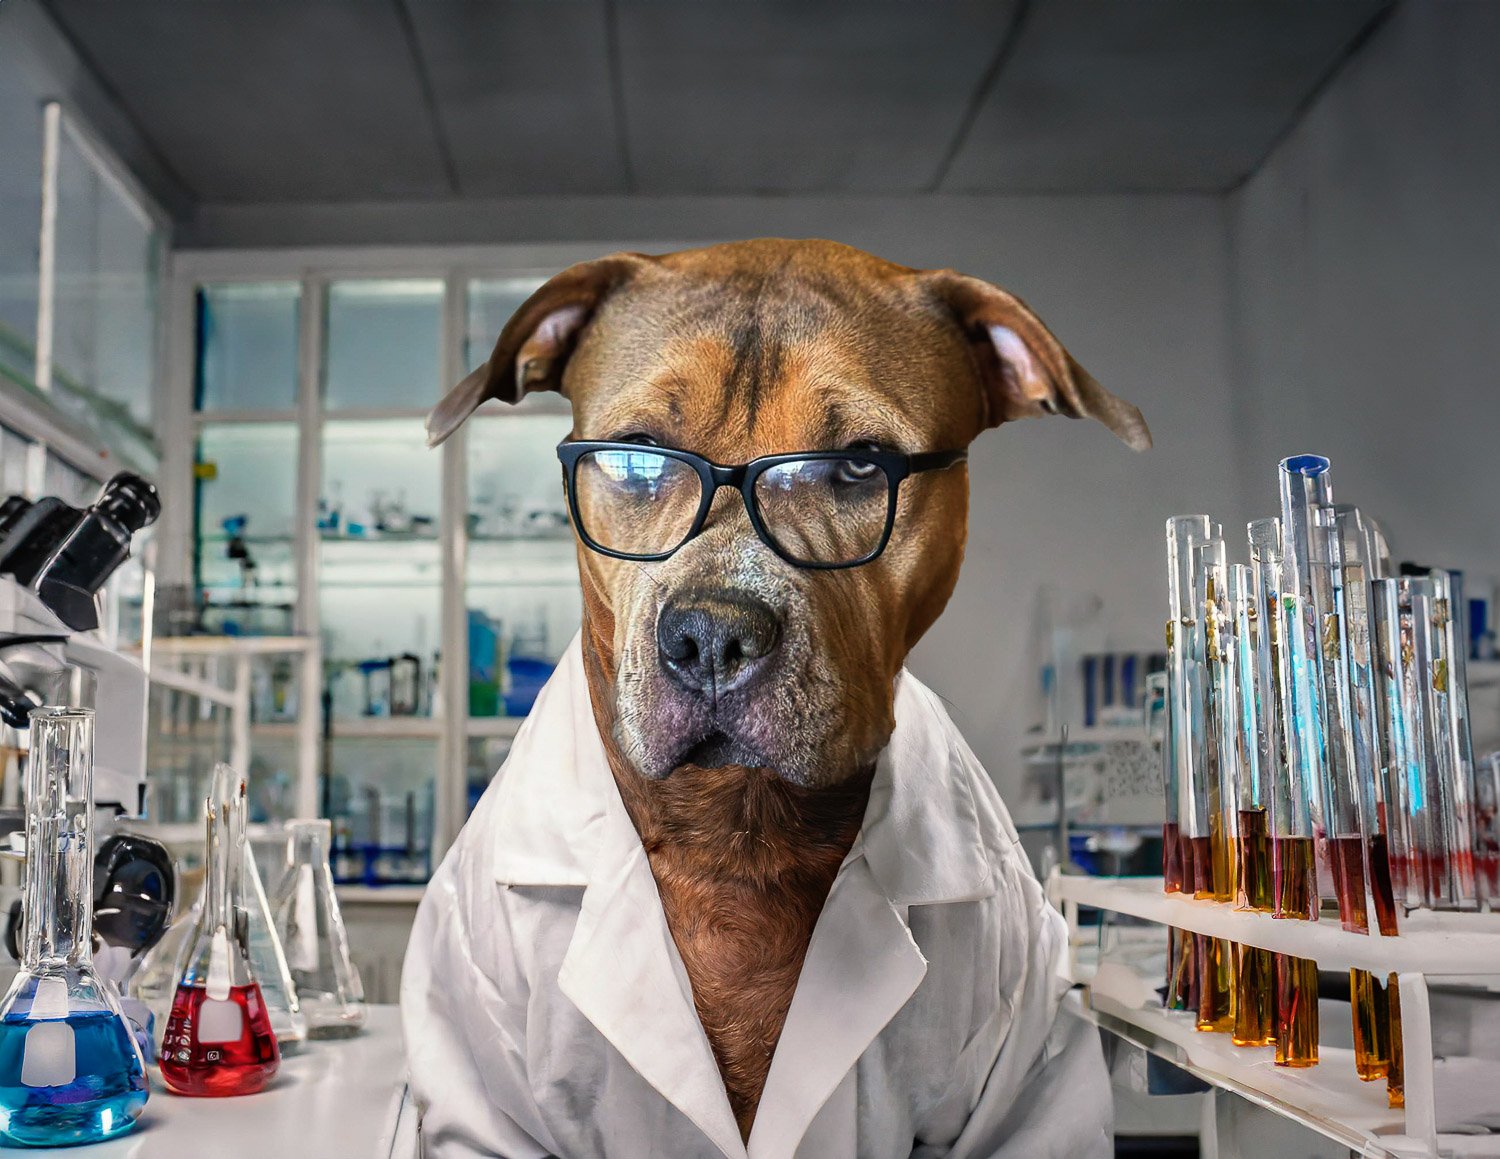 A large reddish brown dog wearing a white lab coat and reading glasses in a scientific laboratory 